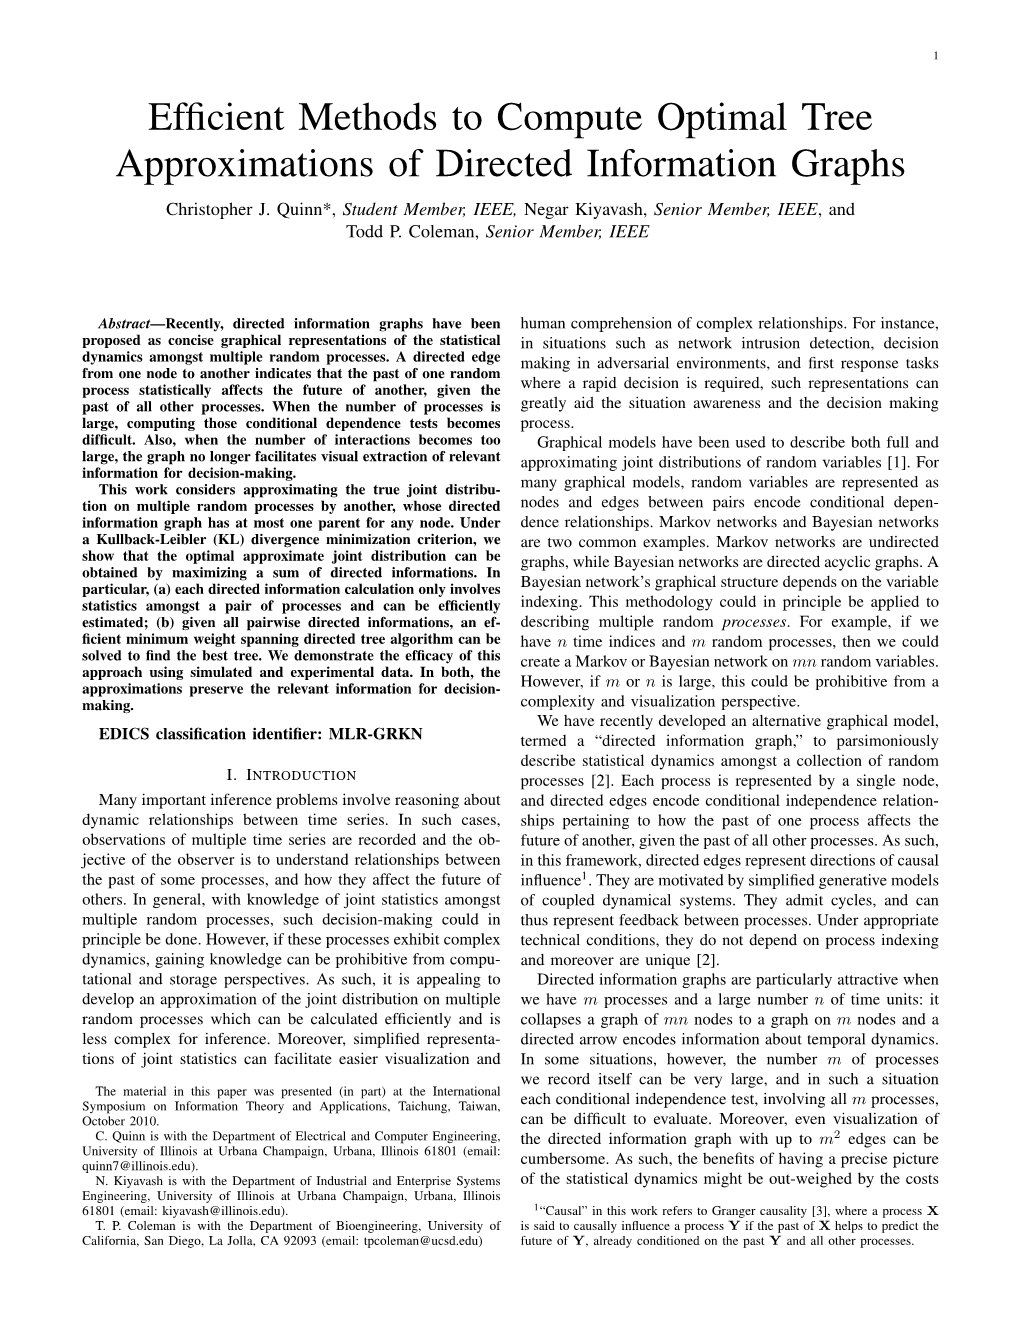 Efficient Methods to Compute Optimal Tree Approximations of Directed